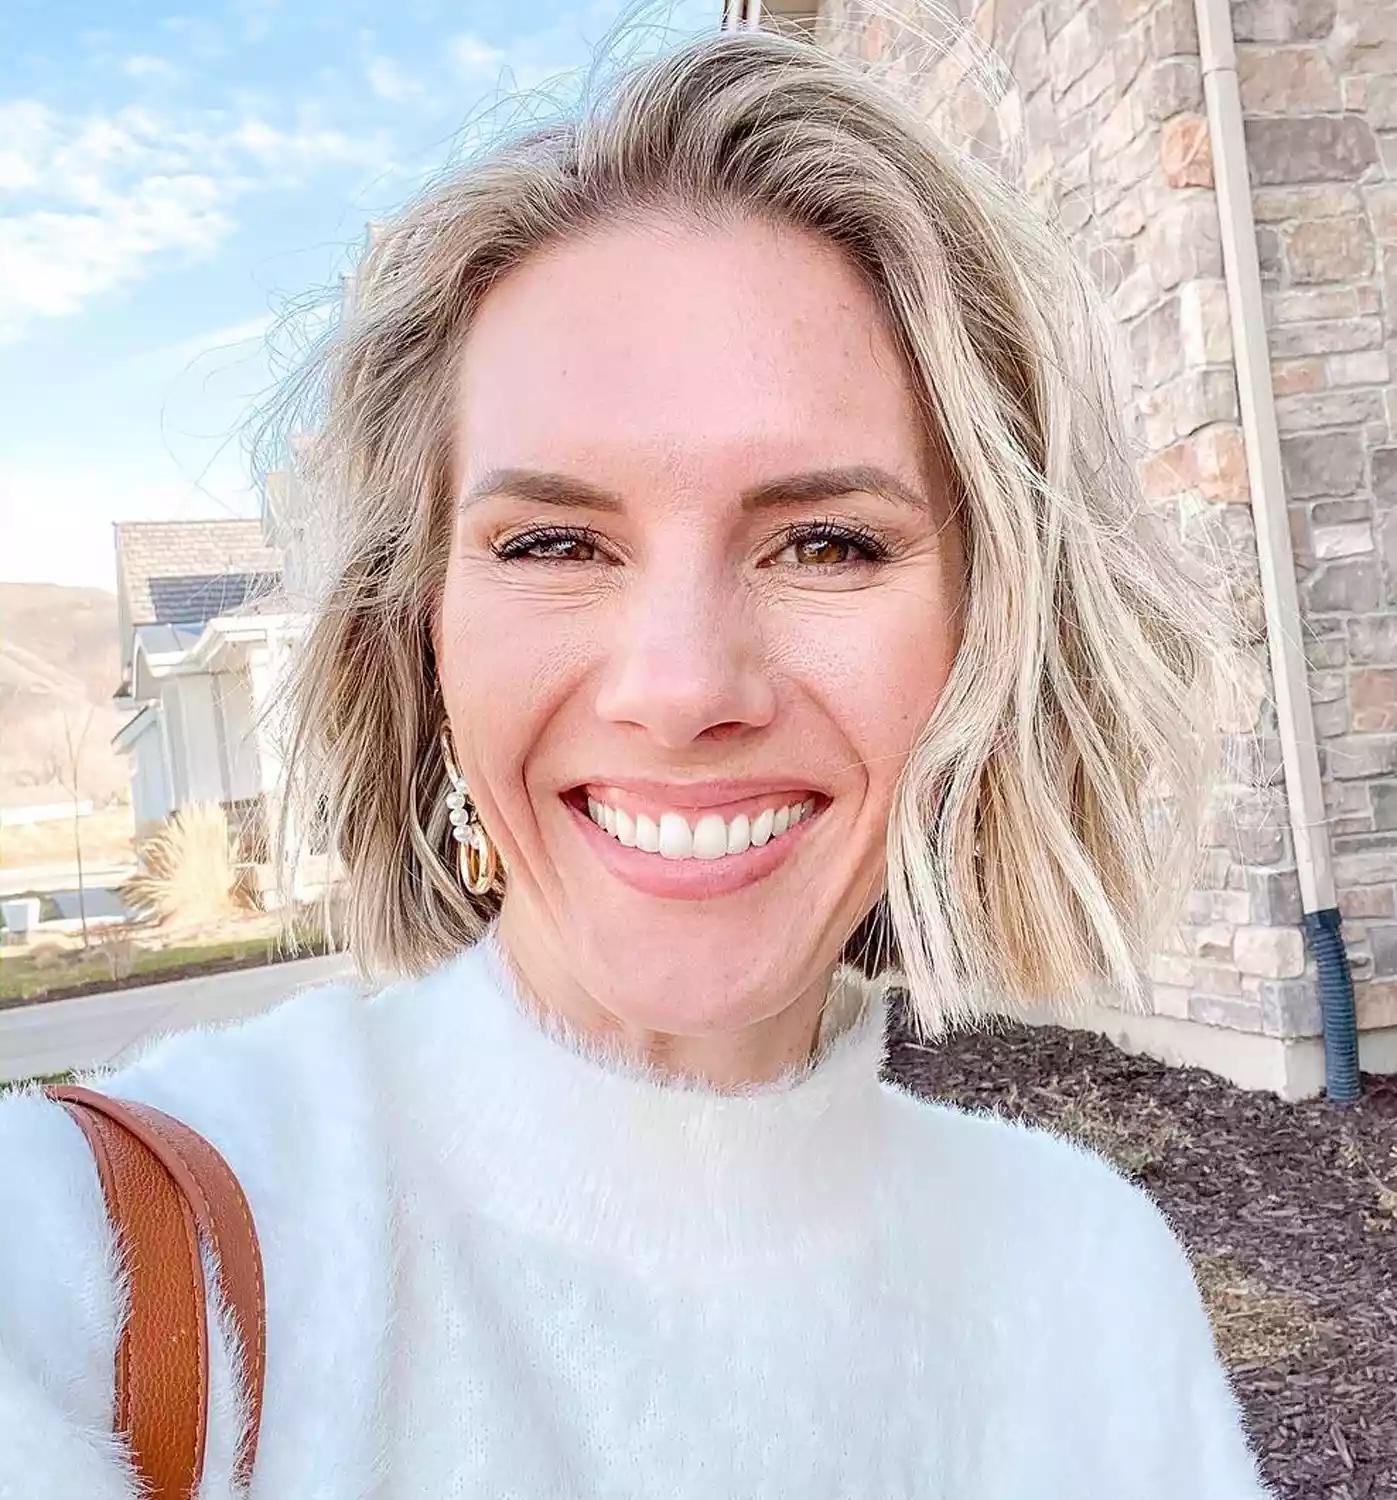 From Beloved Vlogger to Shocking Arrest: Ruby Franke's Unexpected Downfall Explained